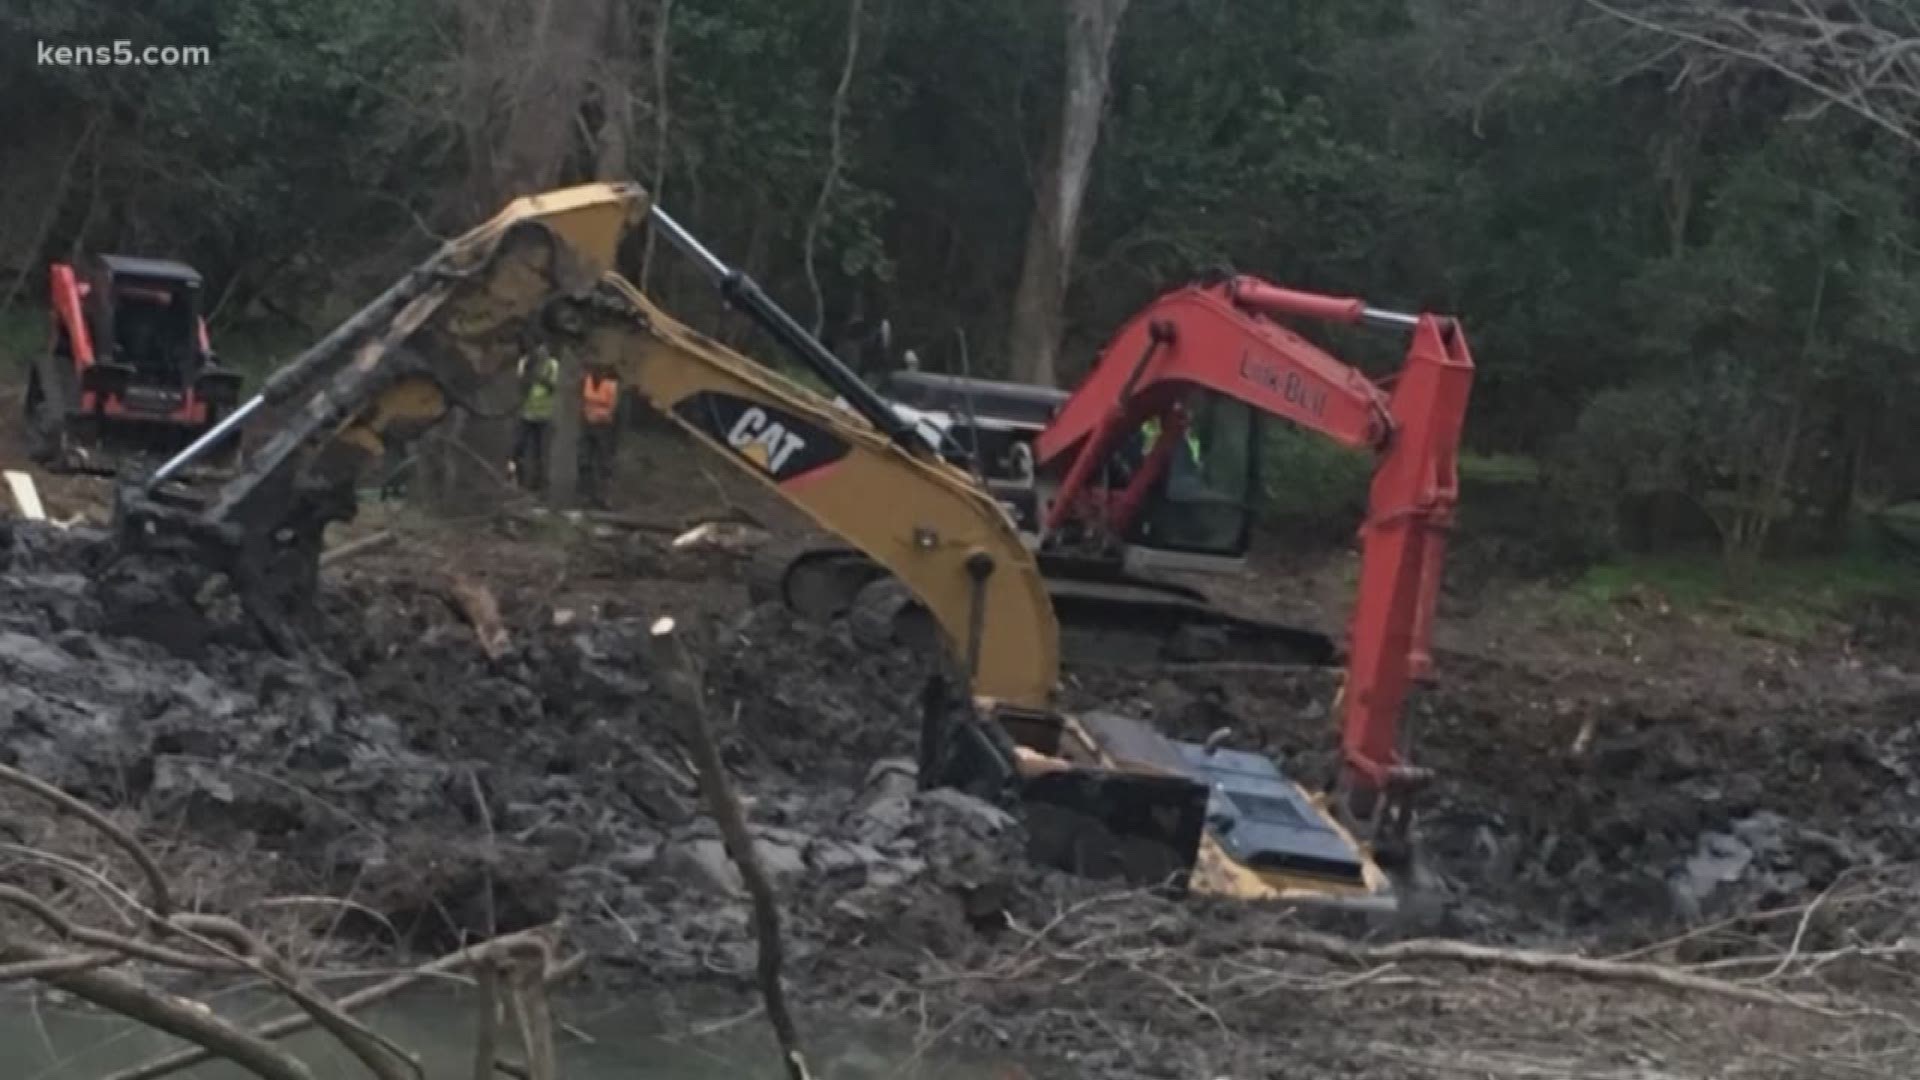 A flood control project gone horribly wrong has caused devastating environmental damage, according to neighbors of Salado Creek.